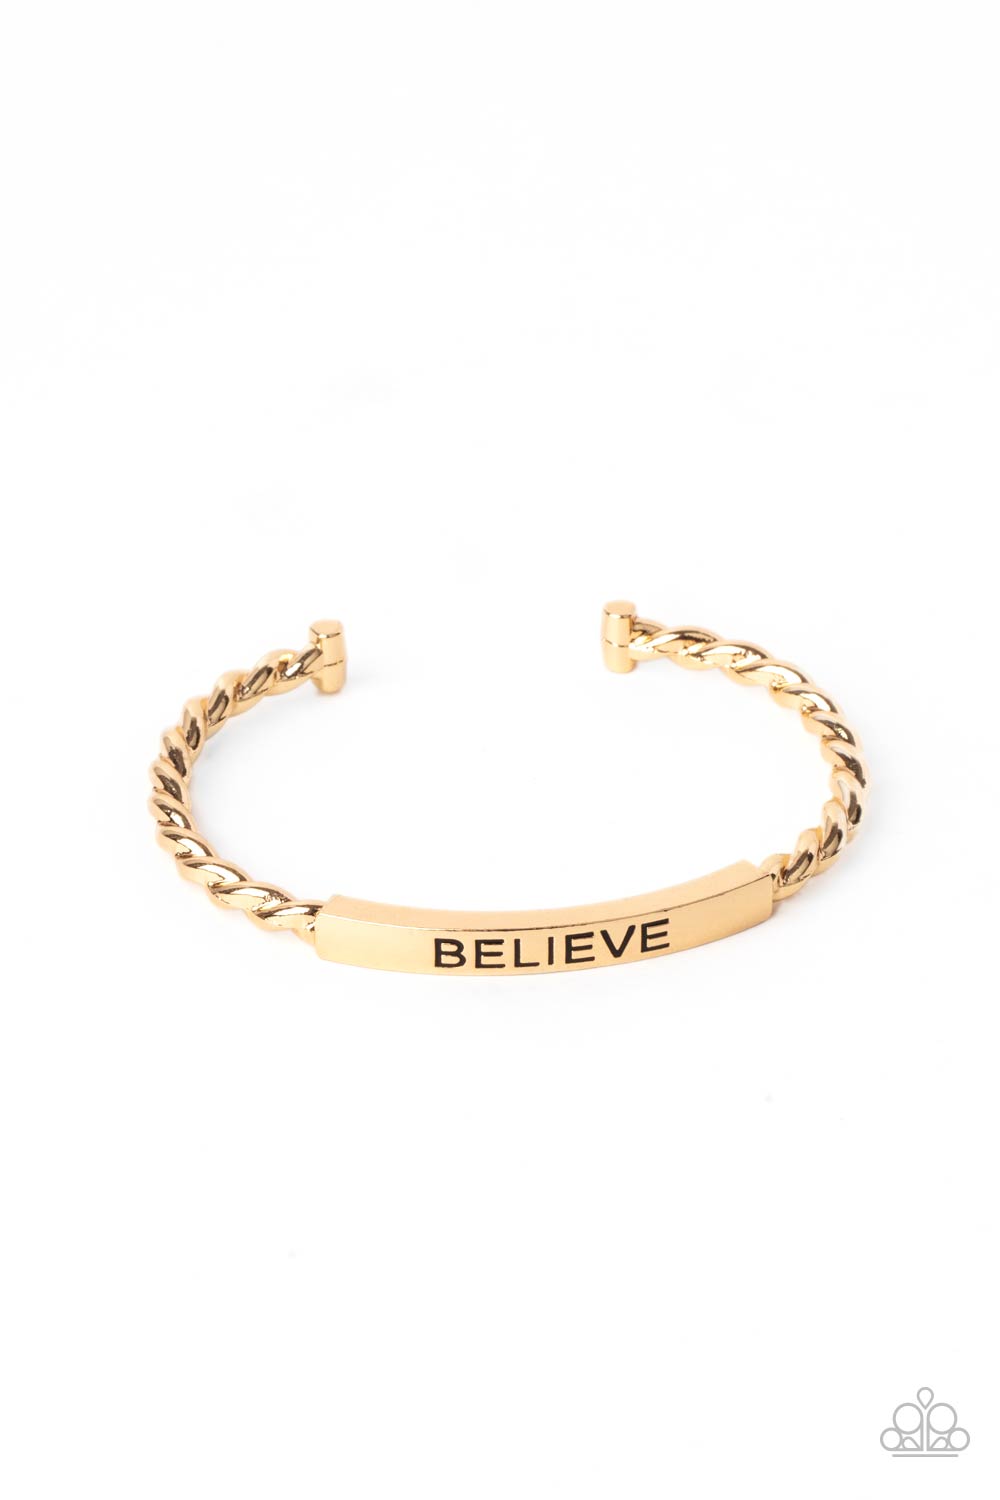 Bracelet - Keep Calm and Believe - Gold